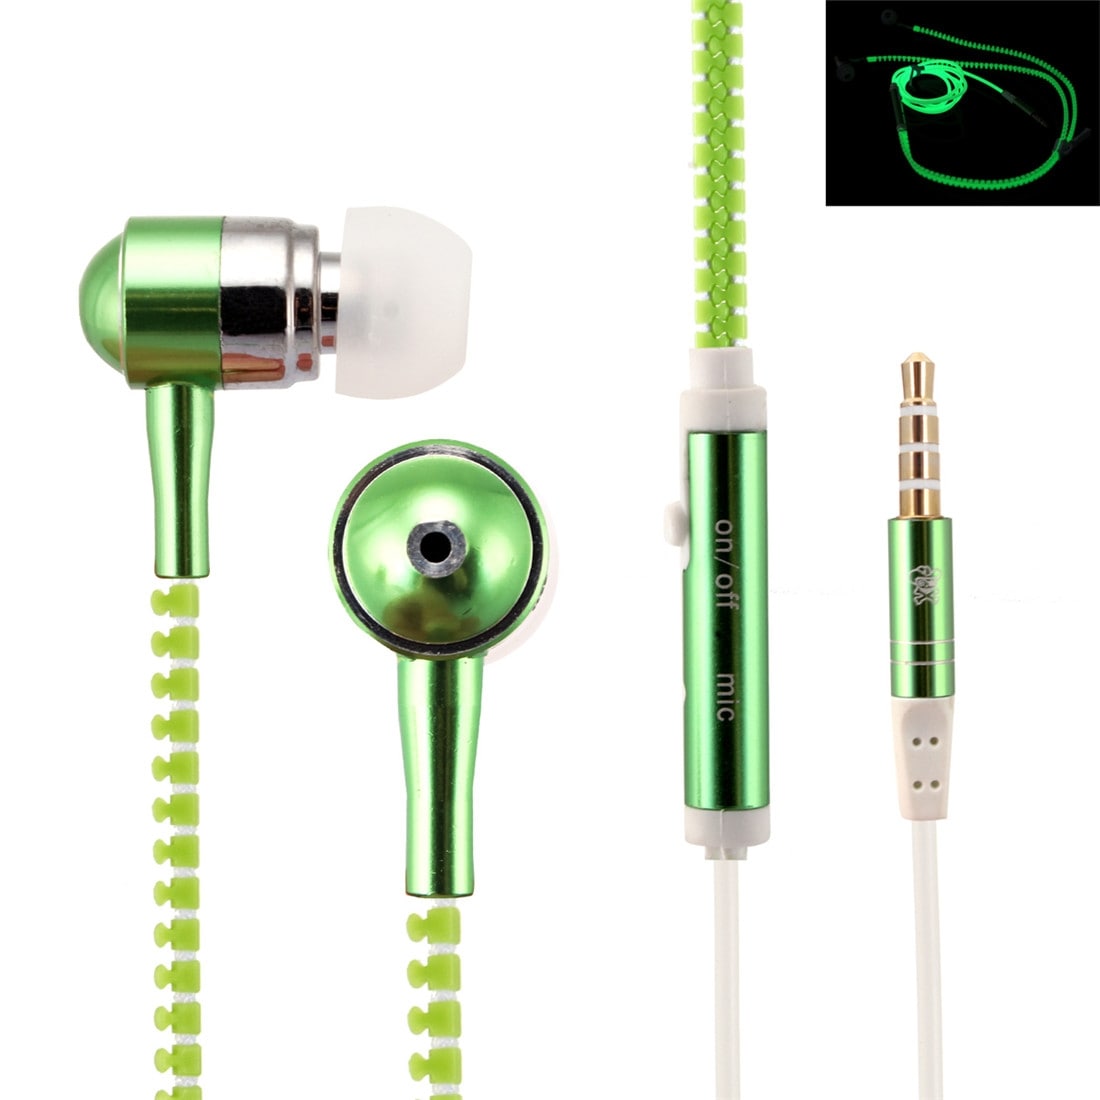 Selvlysende headset In-ear for iPhone, iPad, Samsung, HTC, Sony mm